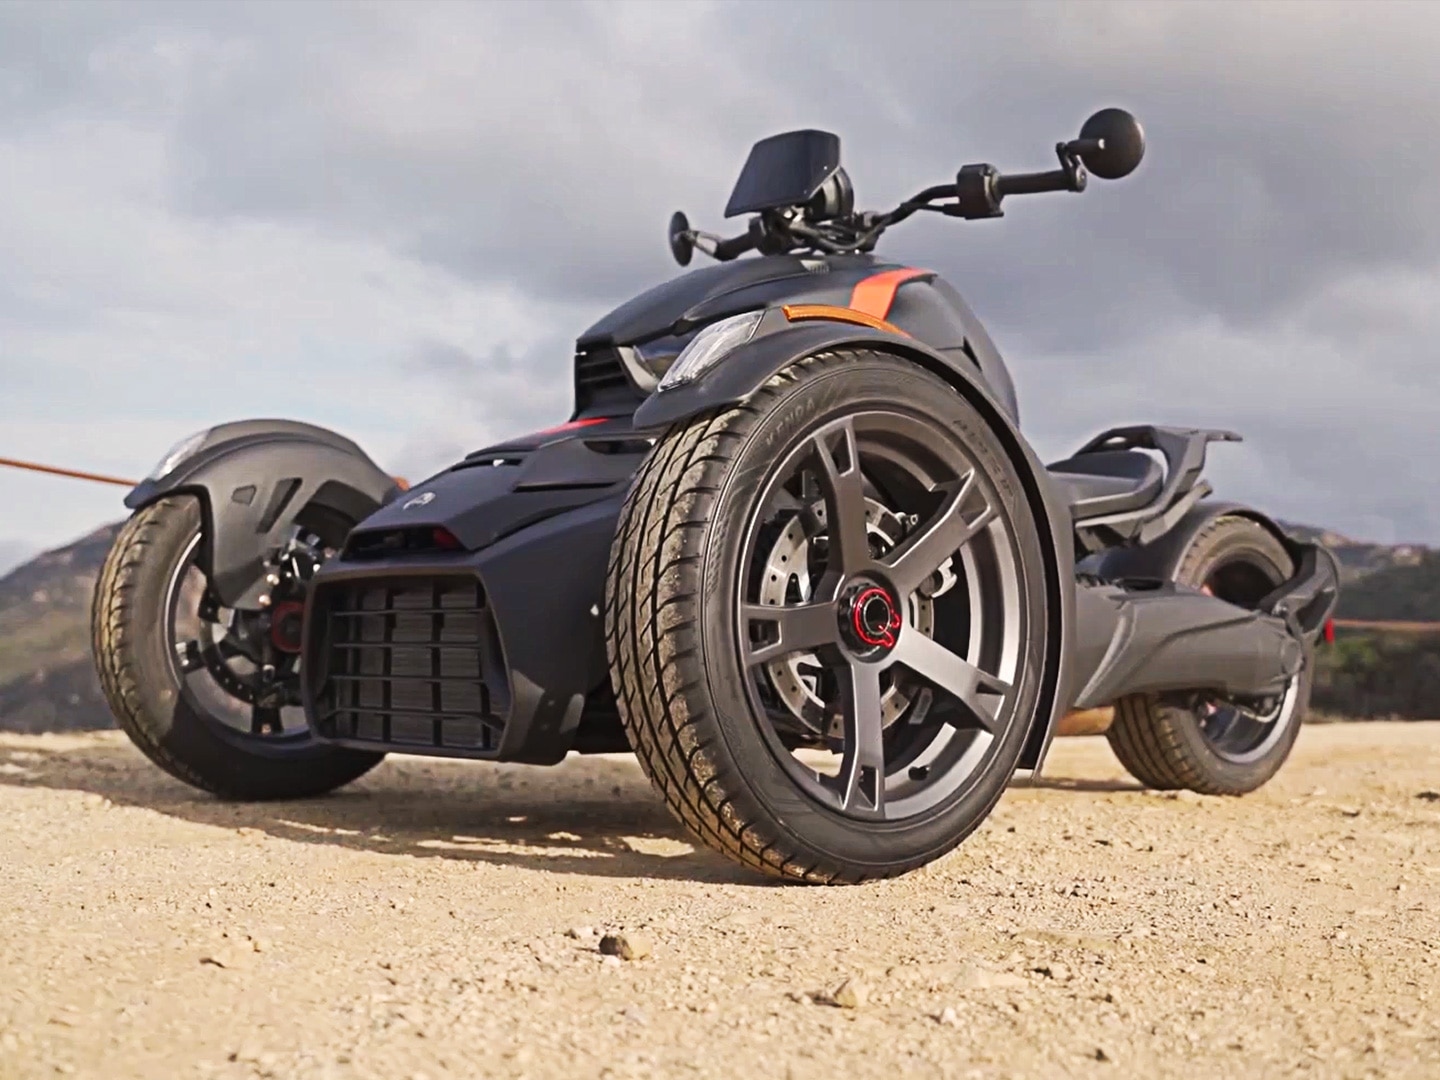 WHERE CAN YOU RIDE A CAN-AM 3-WHEEL MOTORCYCLE?